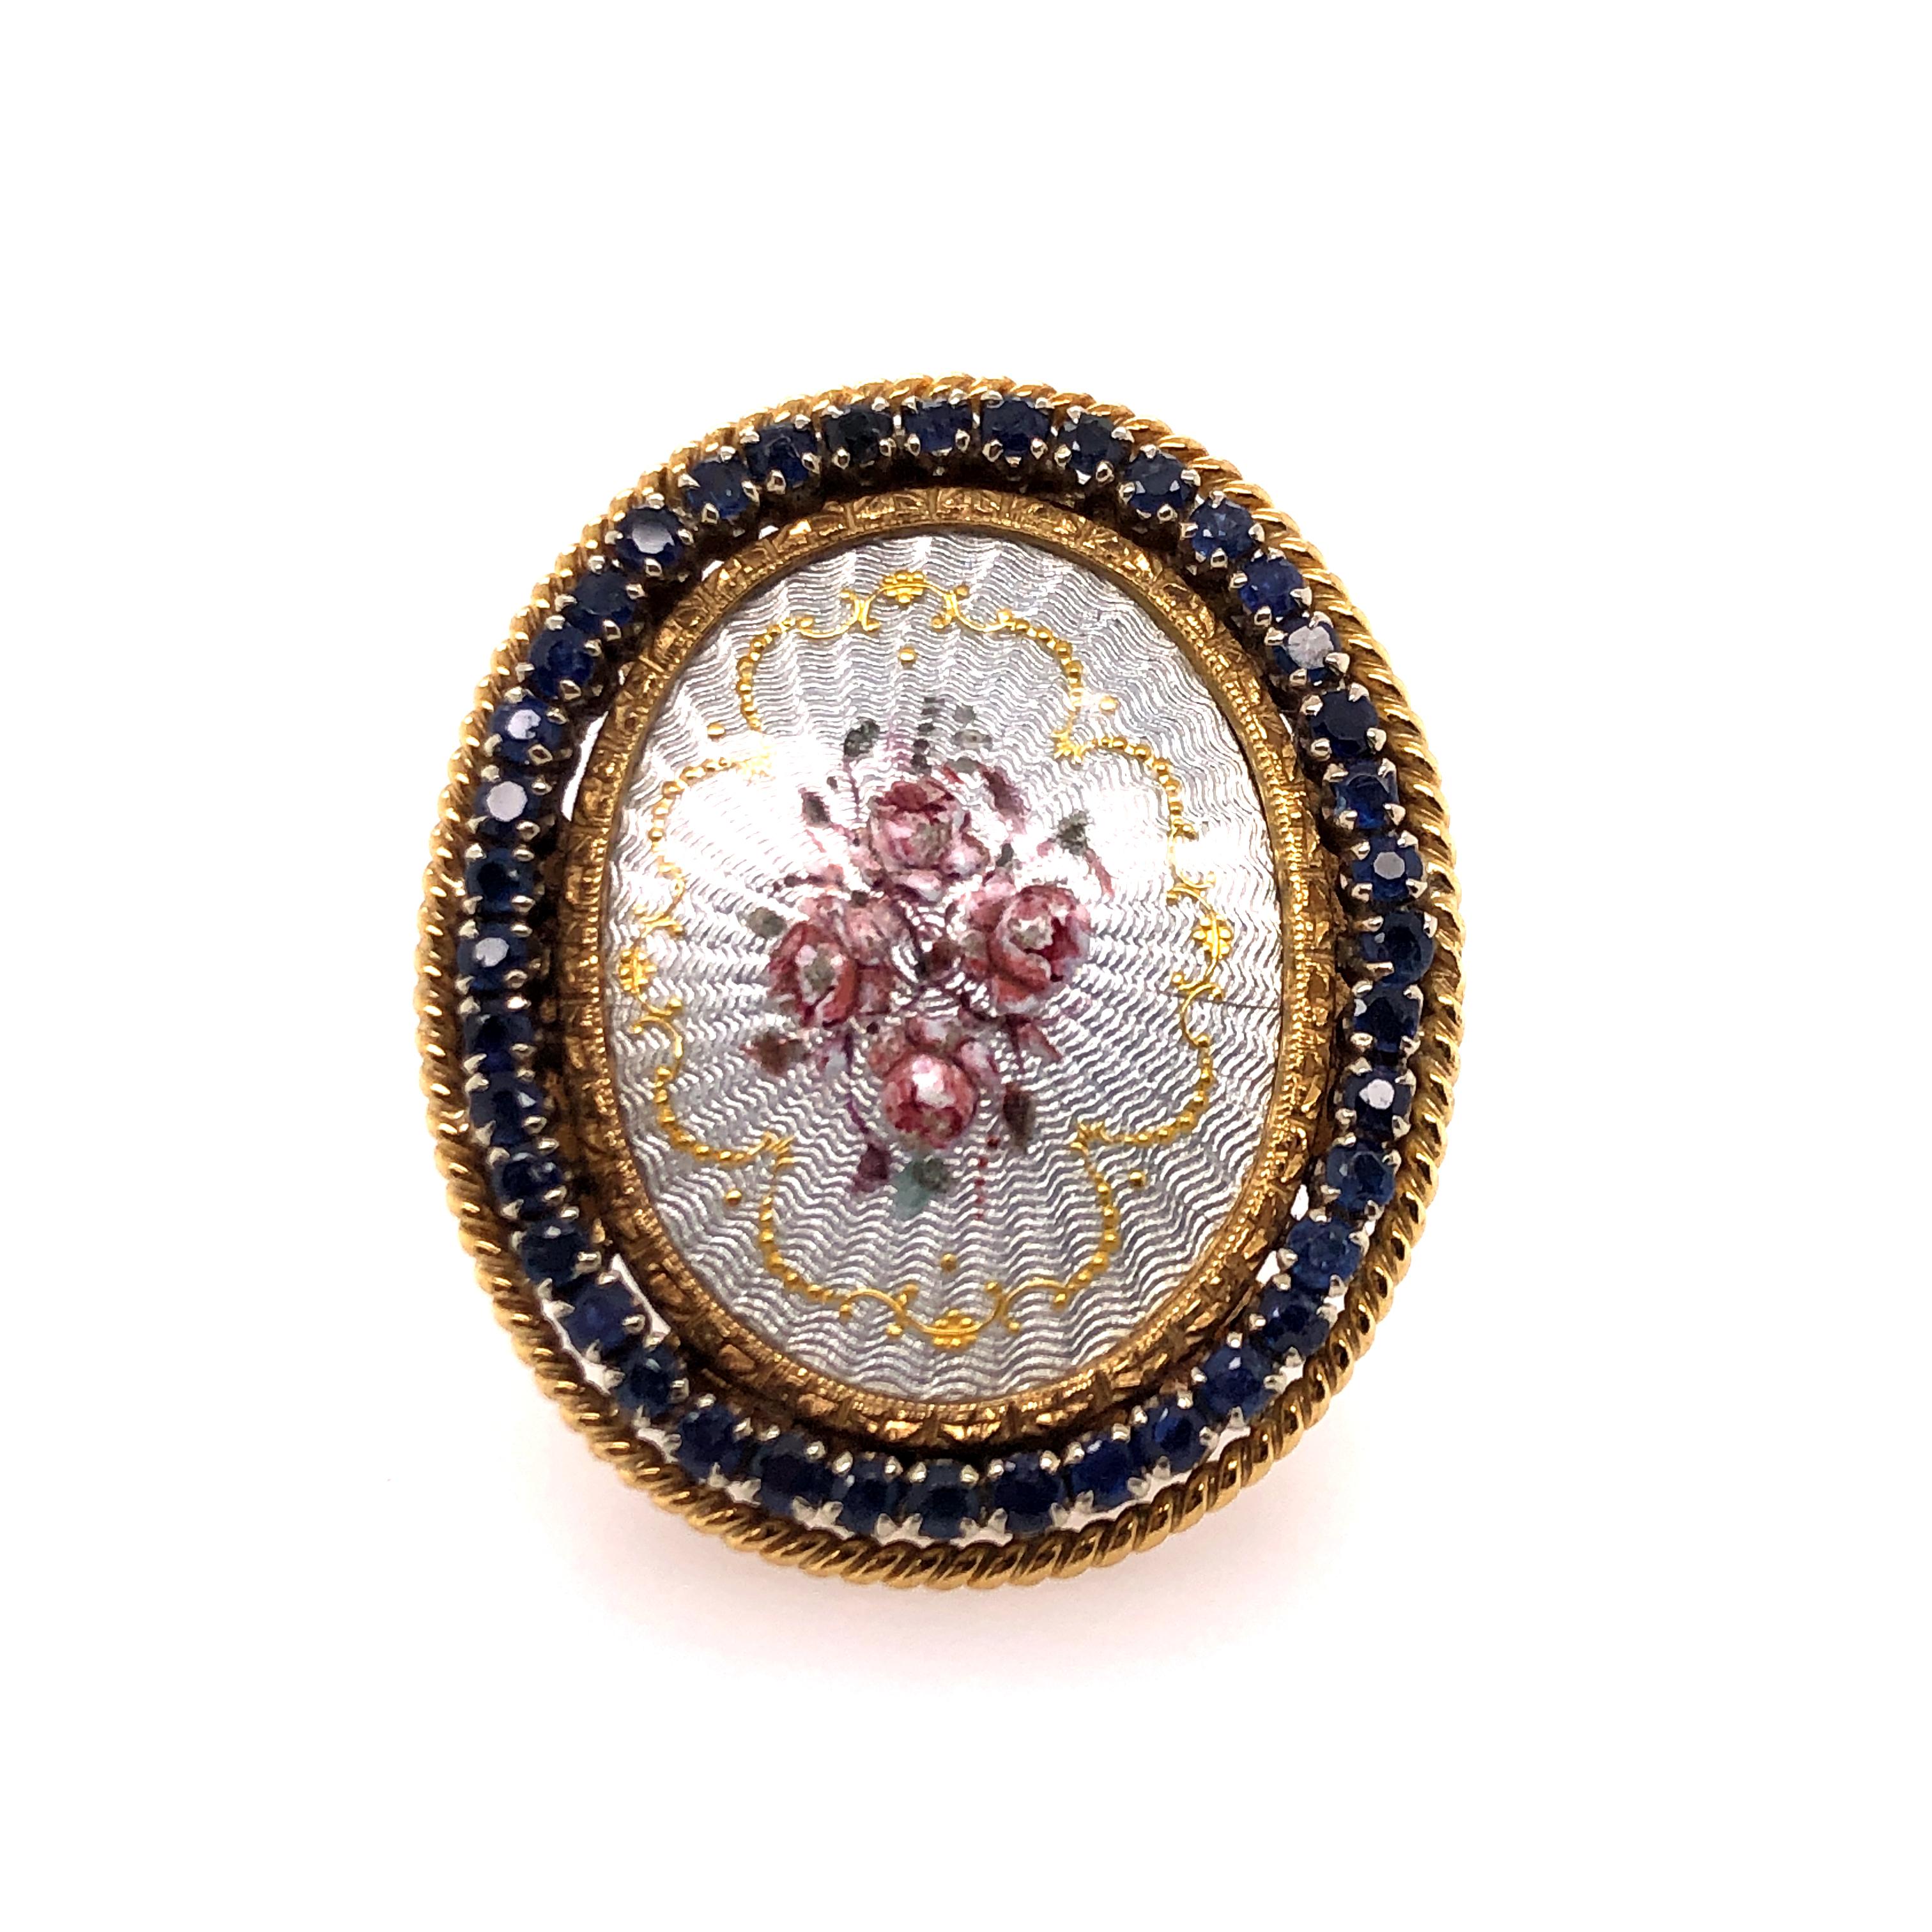 Reminiscent of an era when life moved at a more leisurely pace, and Mrs. Manners was just writing her book, this ring will surely lighten your spirits every time you wear it. 
Four delicate pink roses are organically painted in in the center of an